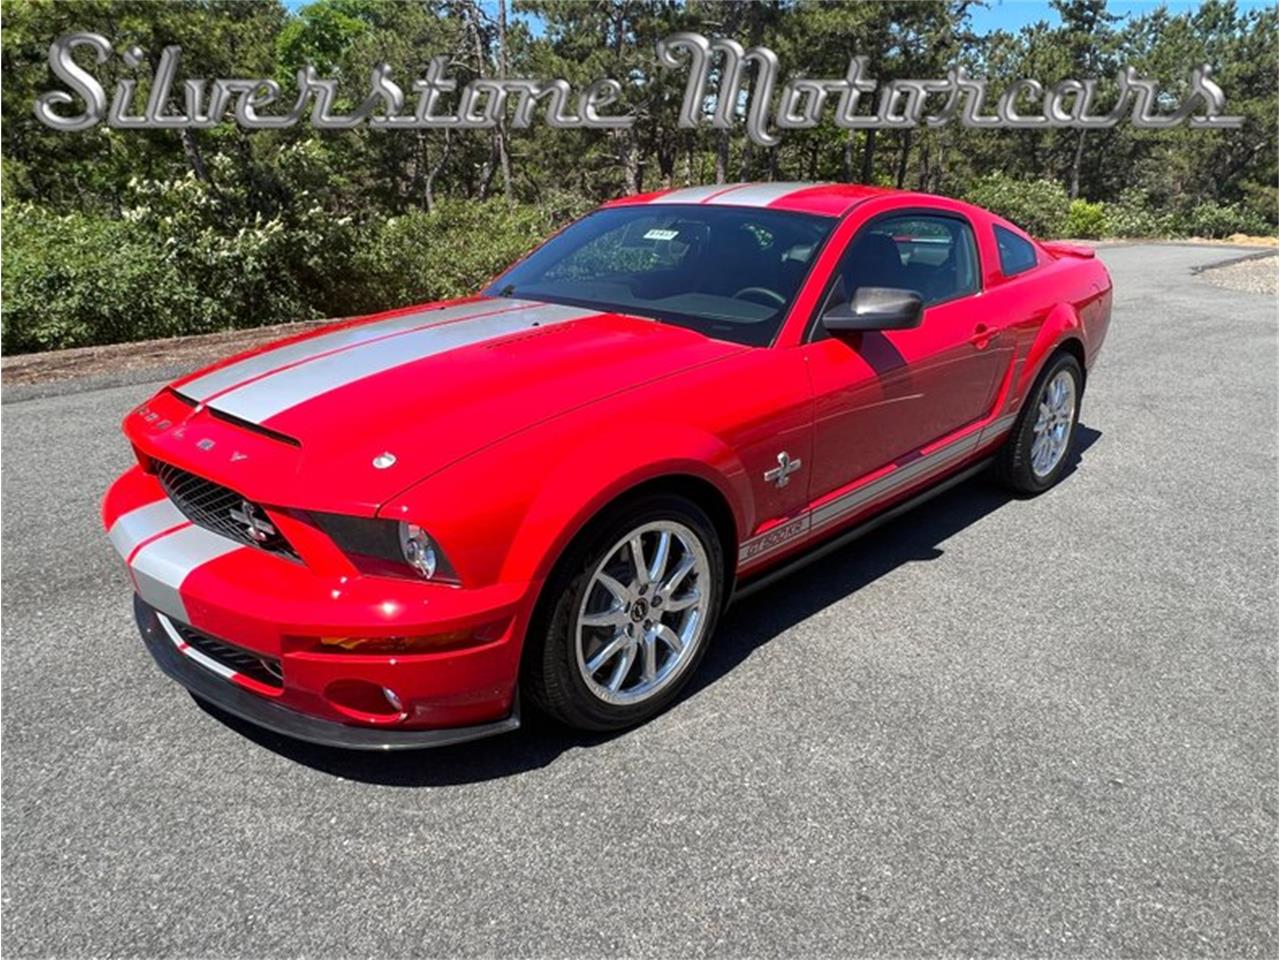 For Sale: 2008 Ford Mustang in North Andover, Massachusetts for sale in North Andover, MA